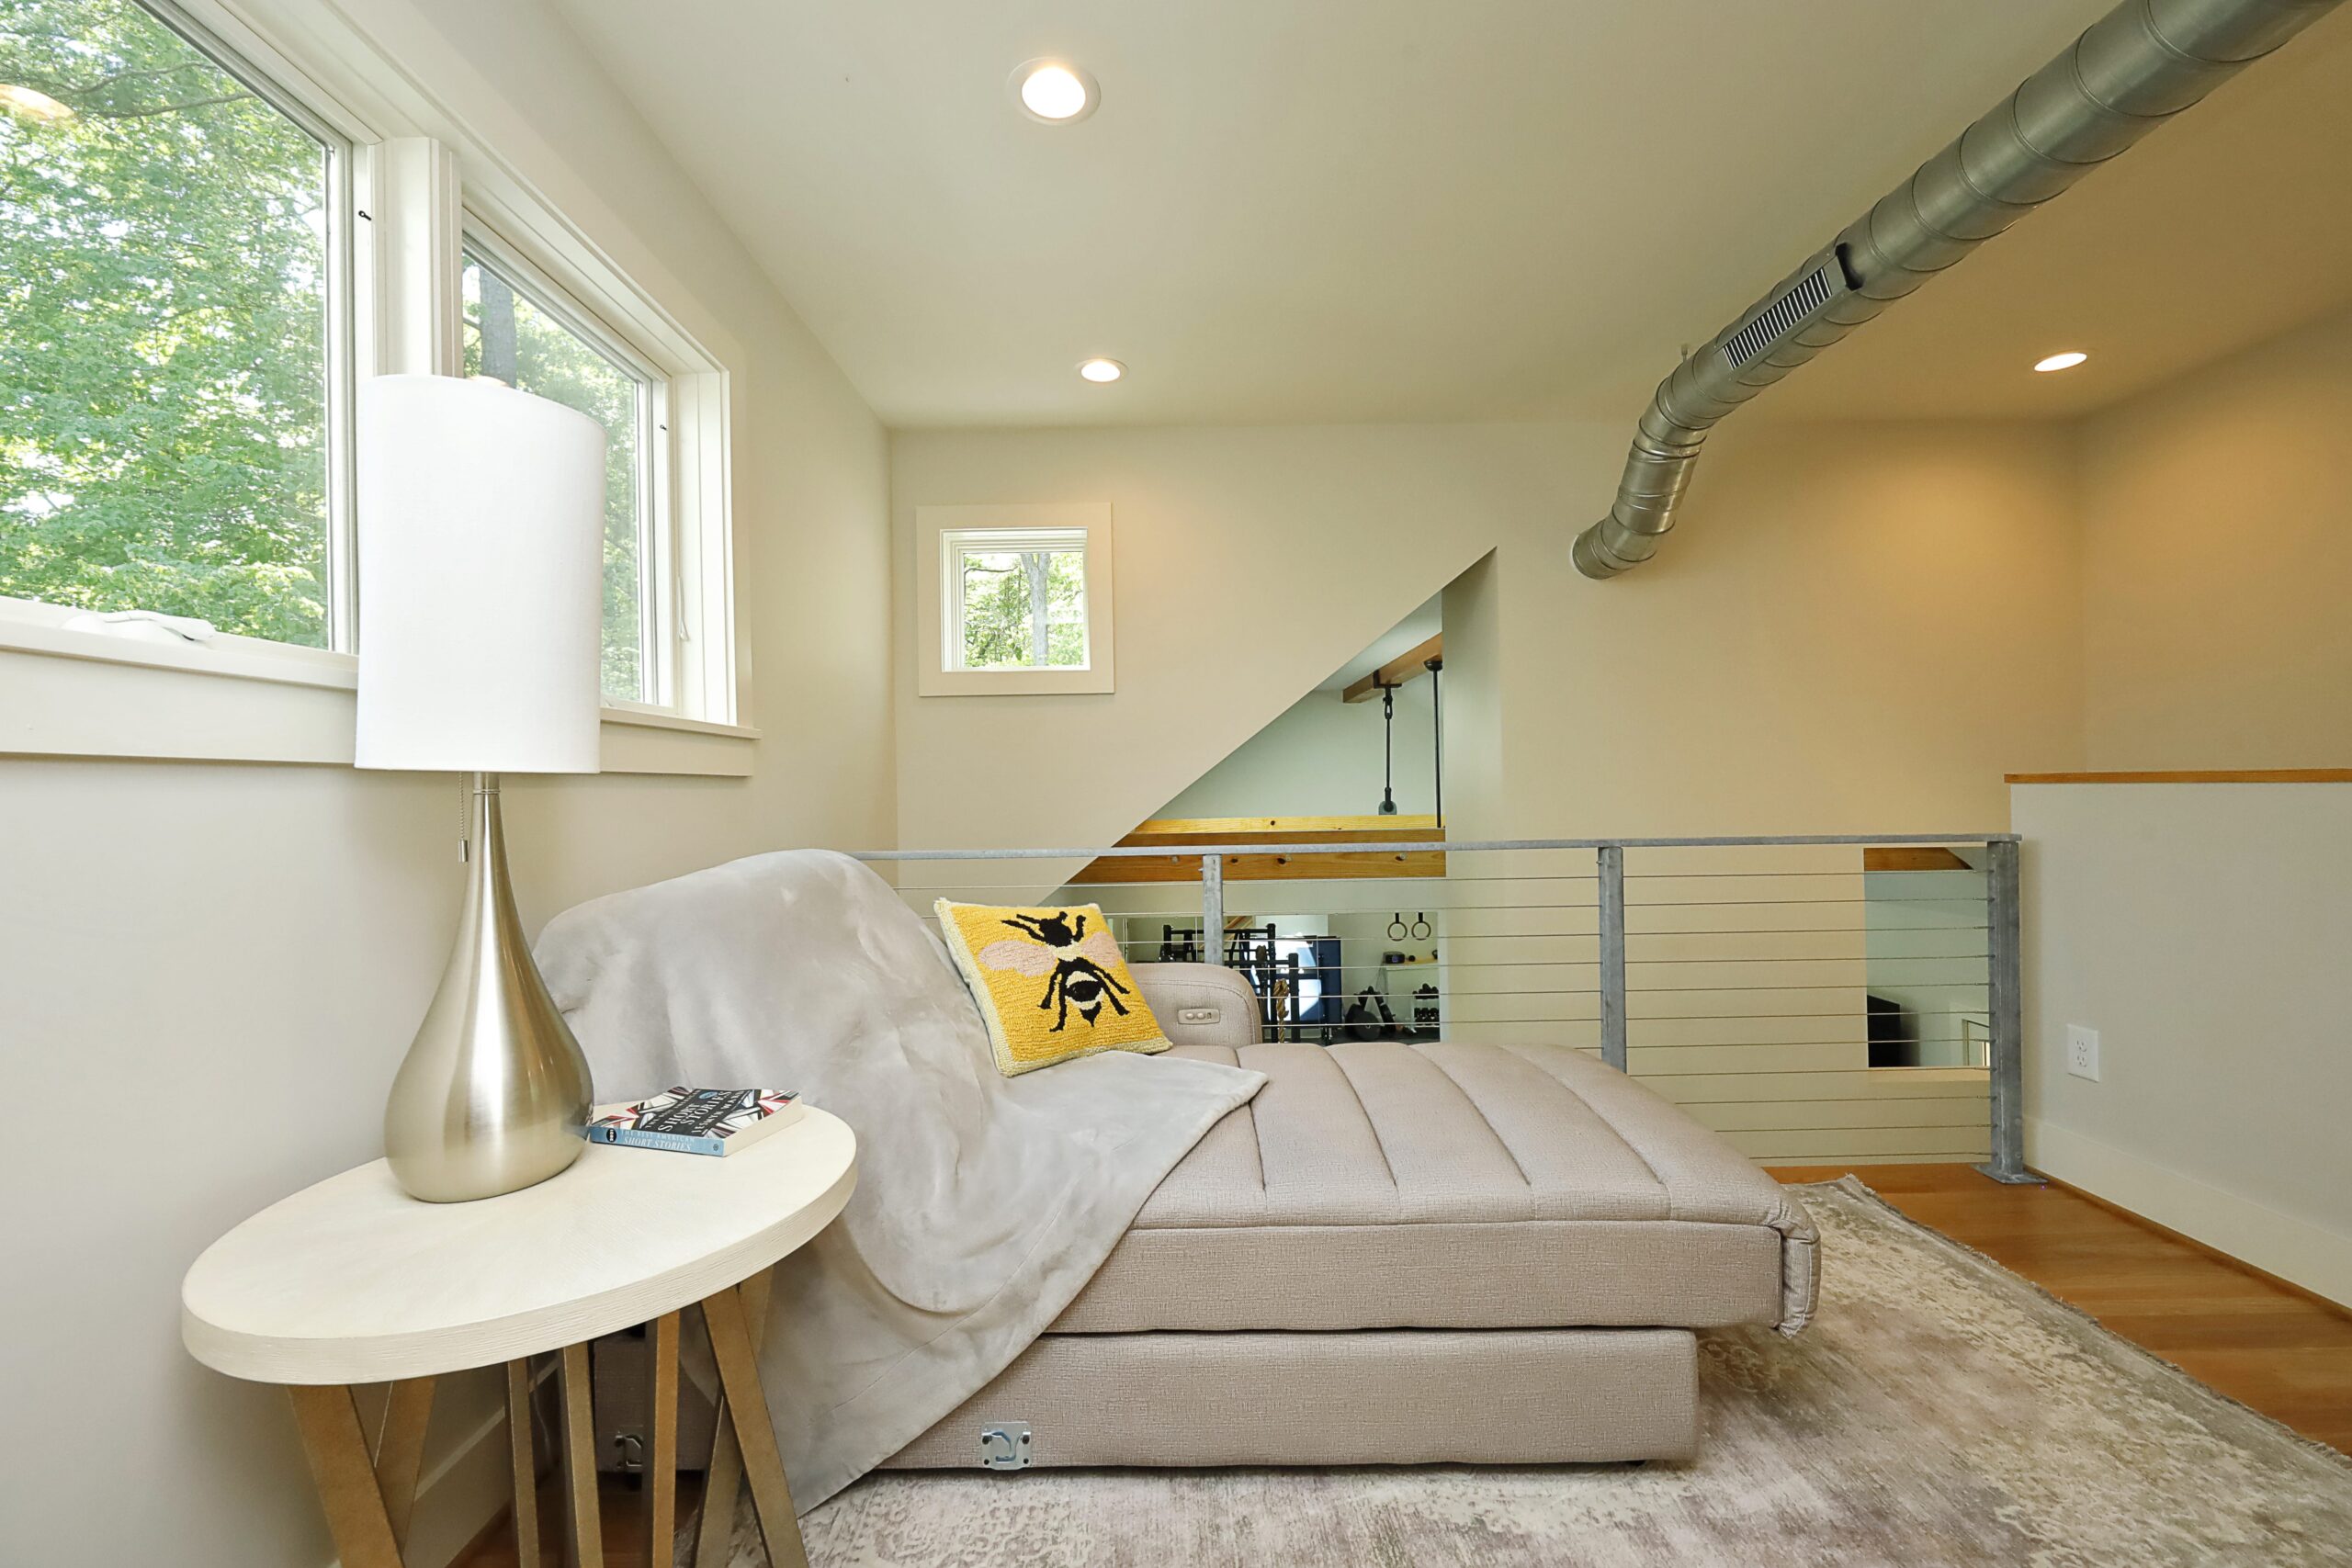 A chaise lounge sits in the new loft, overlooking the elegant stair and home gym. The loft is surrounded by windows and unique interior cut-outs that open up the space.